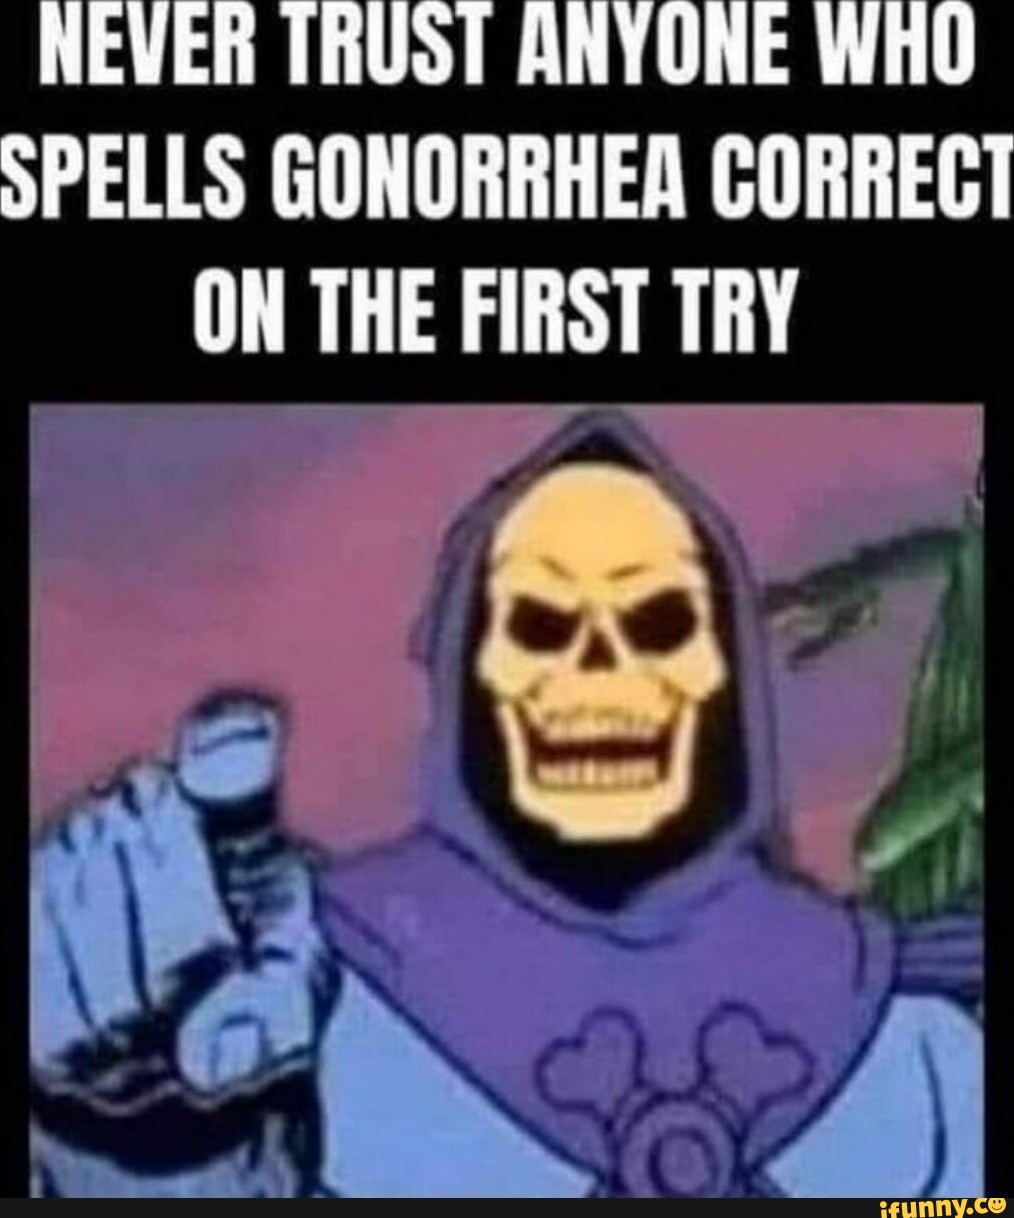 NEVER TRUST ANYONE Will SPELLS GONORRHEA CORRECT ON THE FIRST TRY - iFunny